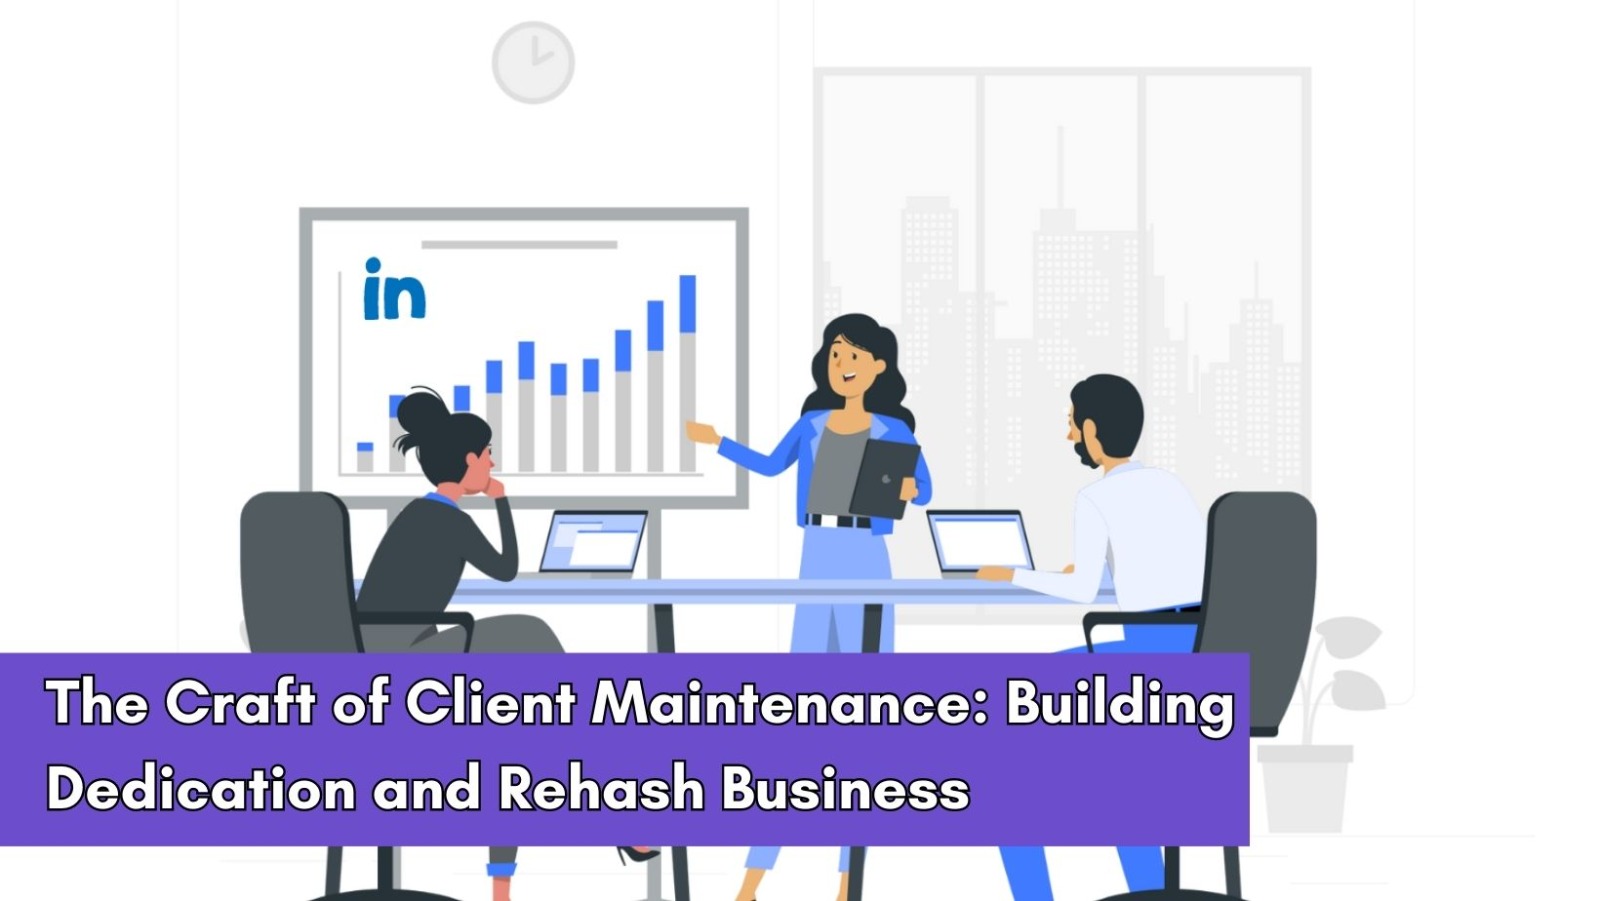 The Craft of Client Maintenance: Building Dedication and Rehash Business